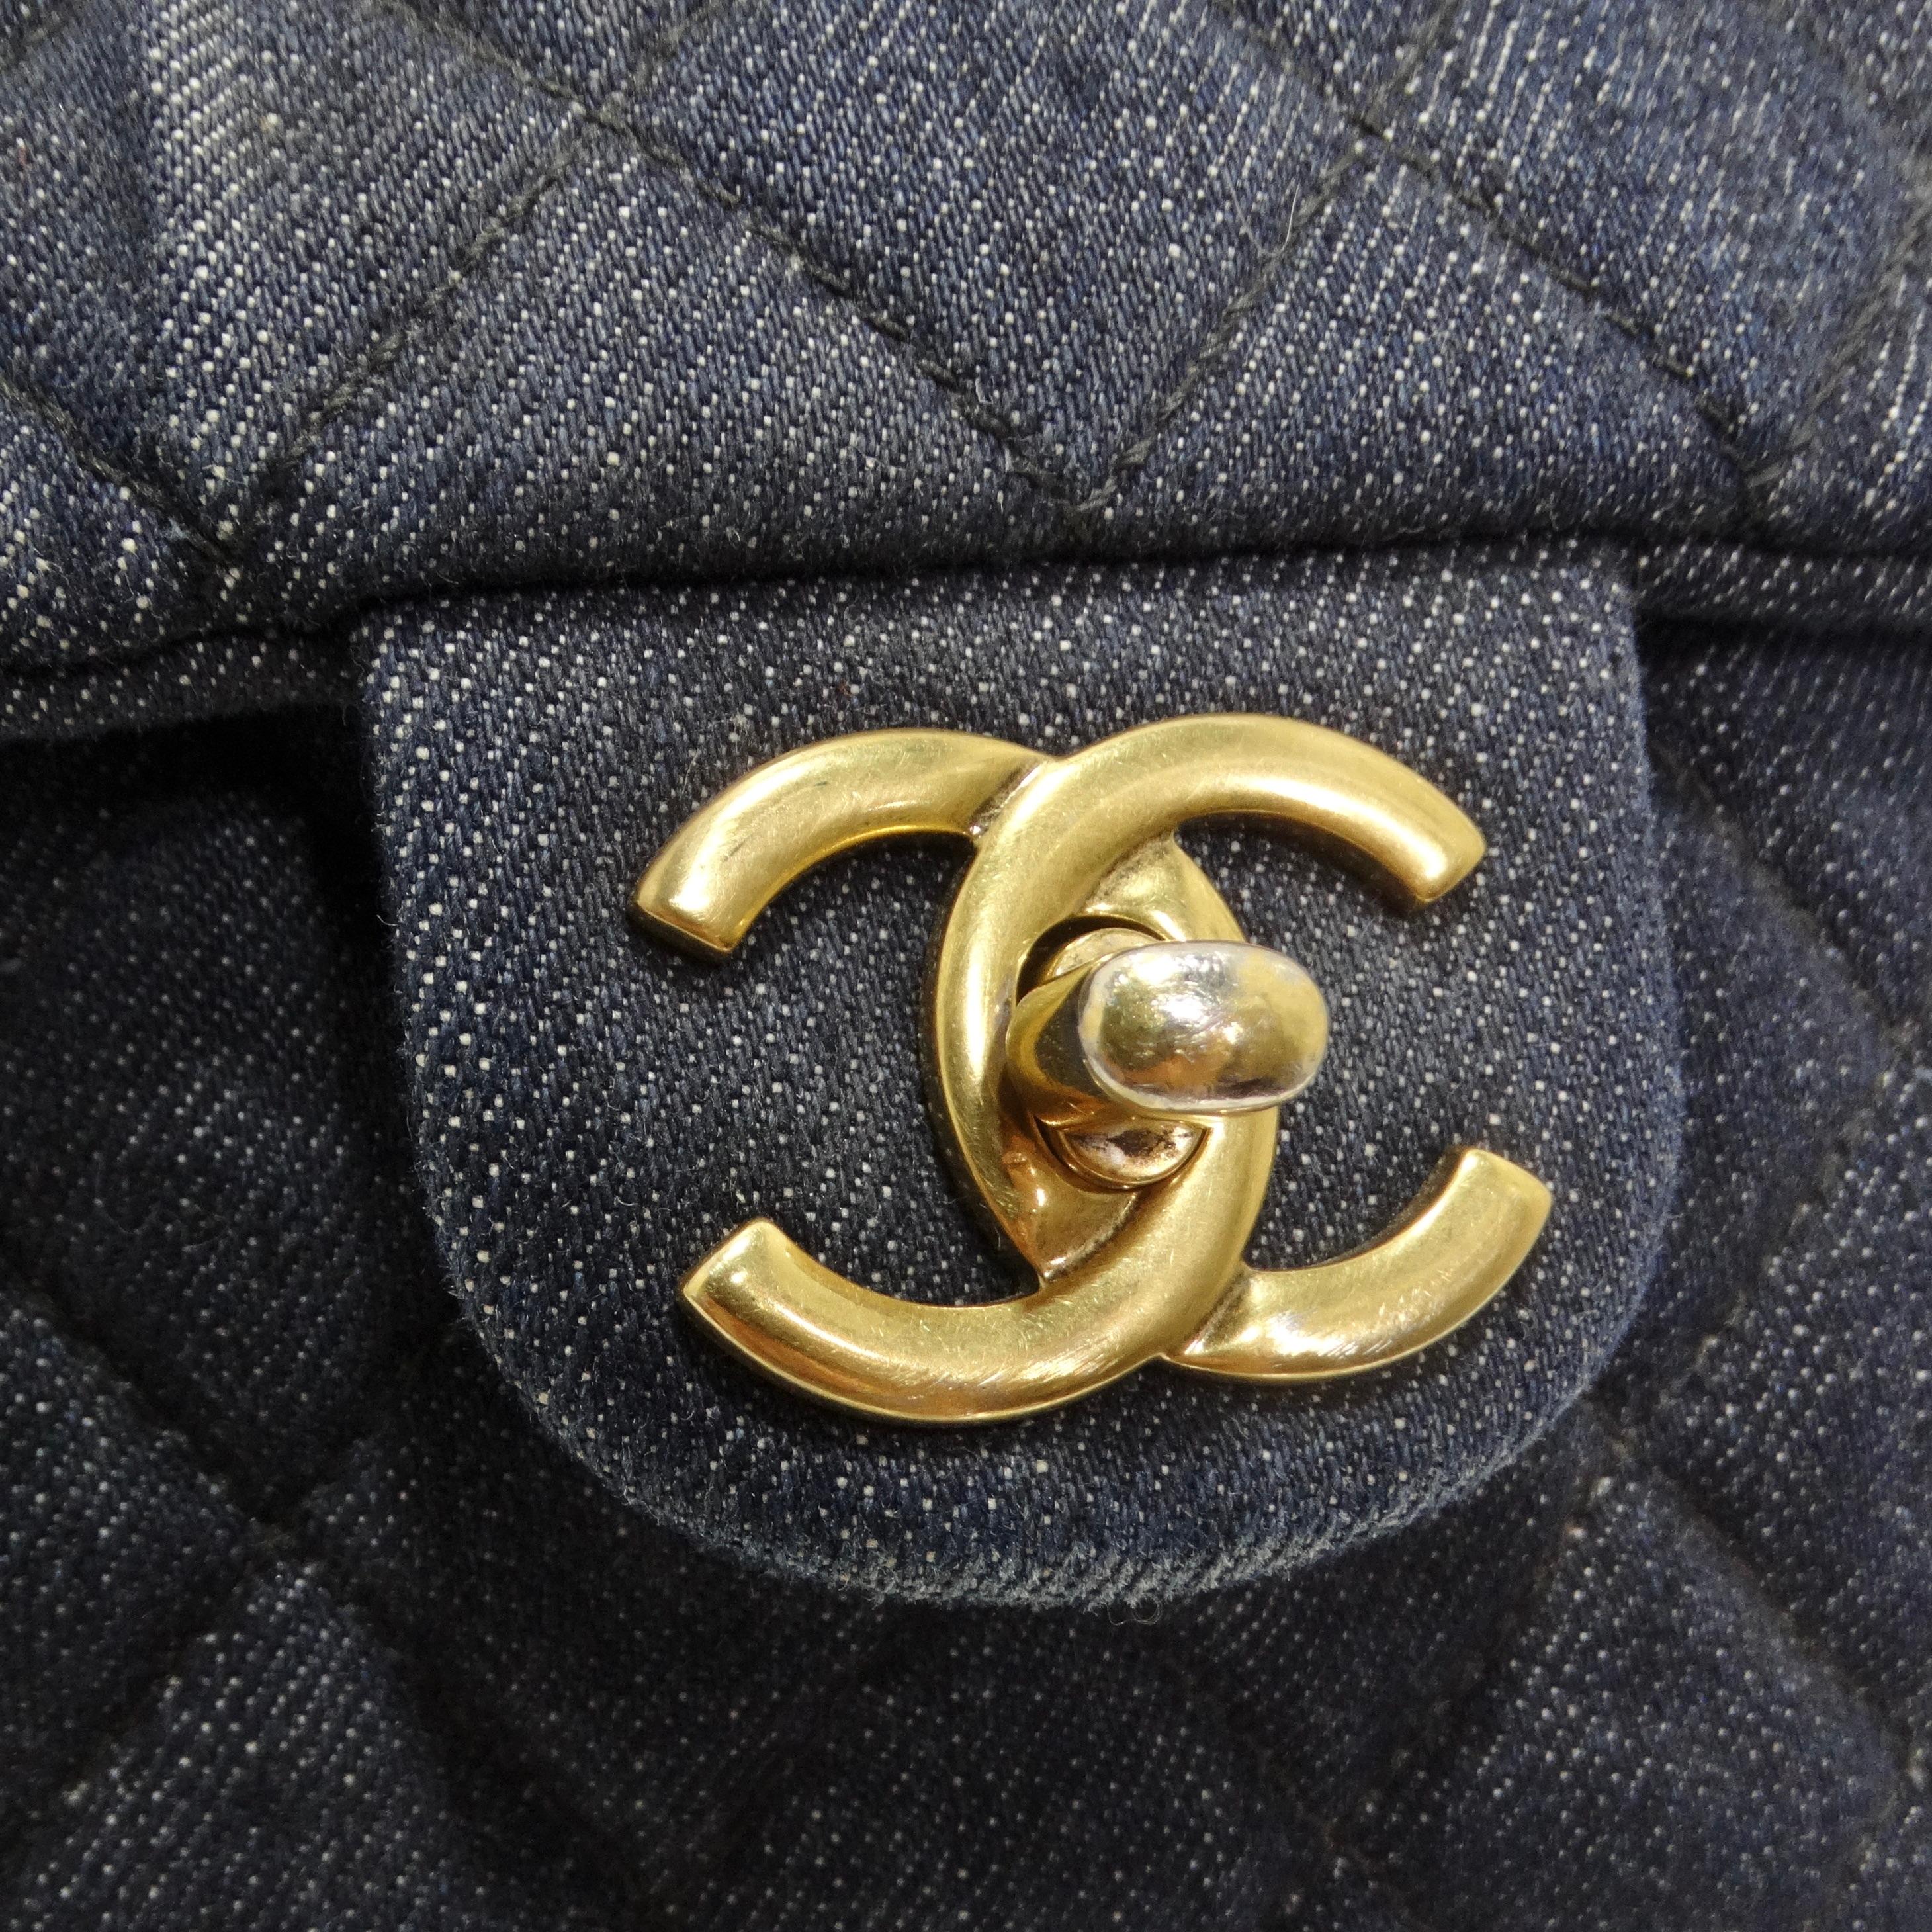 Do not miss out on a backpack that's not just an accessory, but a fashion statement - the Chanel Urban Spirit Quilted Denim Backpack in Dark Blue. This stylish backpack is beautifully crafted from diamond-quilted washed denim in blue, featuring gold